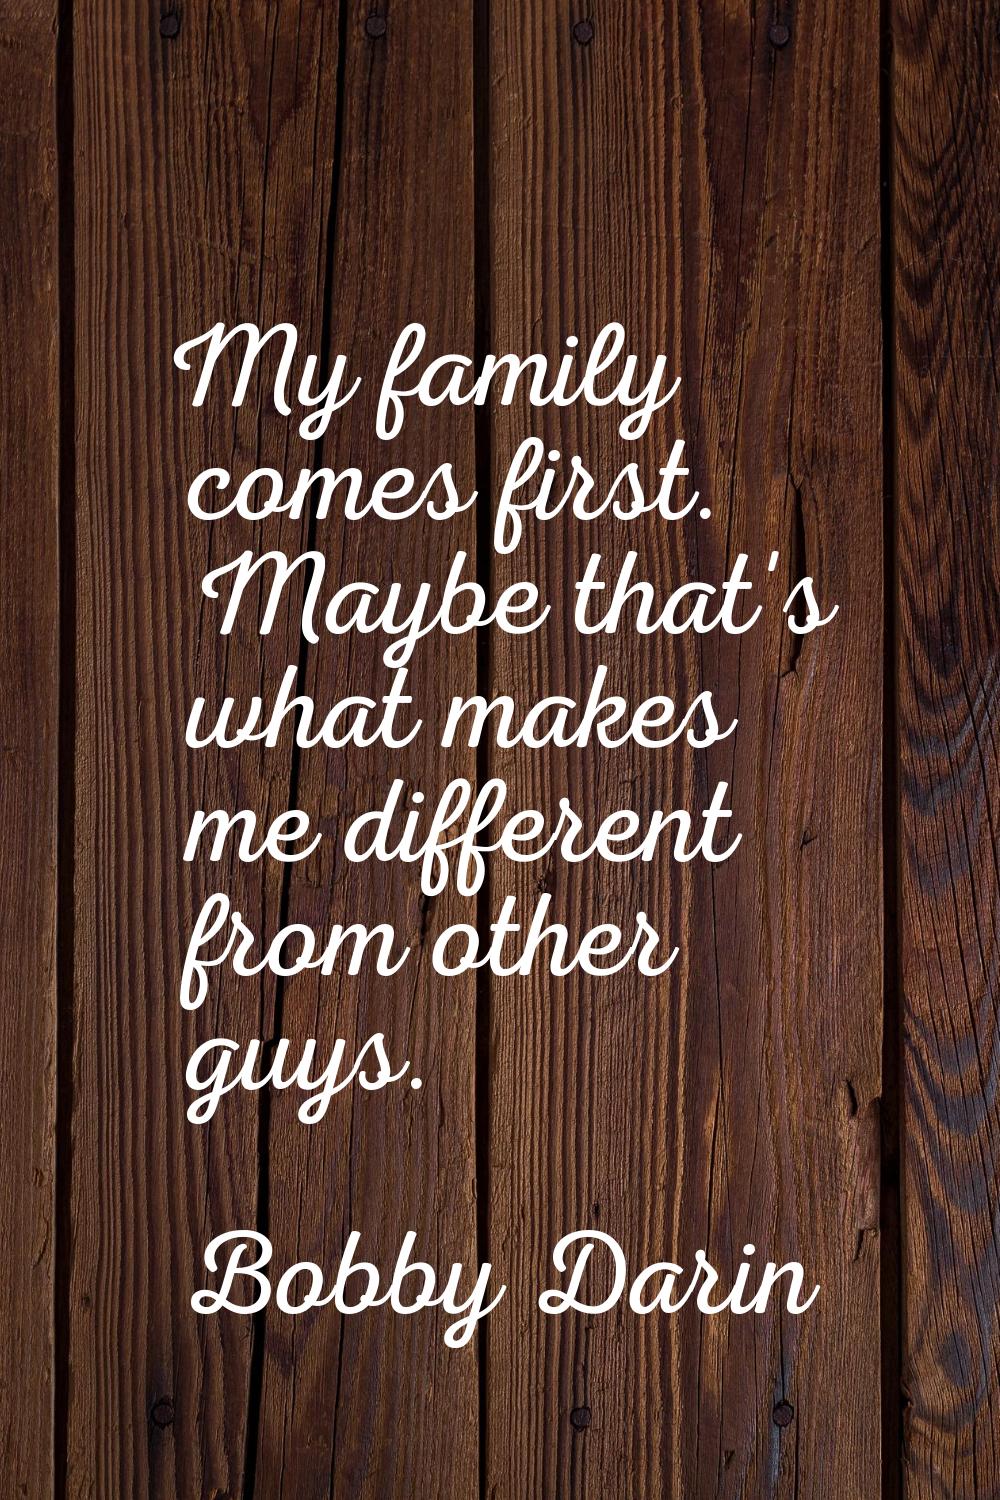 My family comes first. Maybe that's what makes me different from other guys.